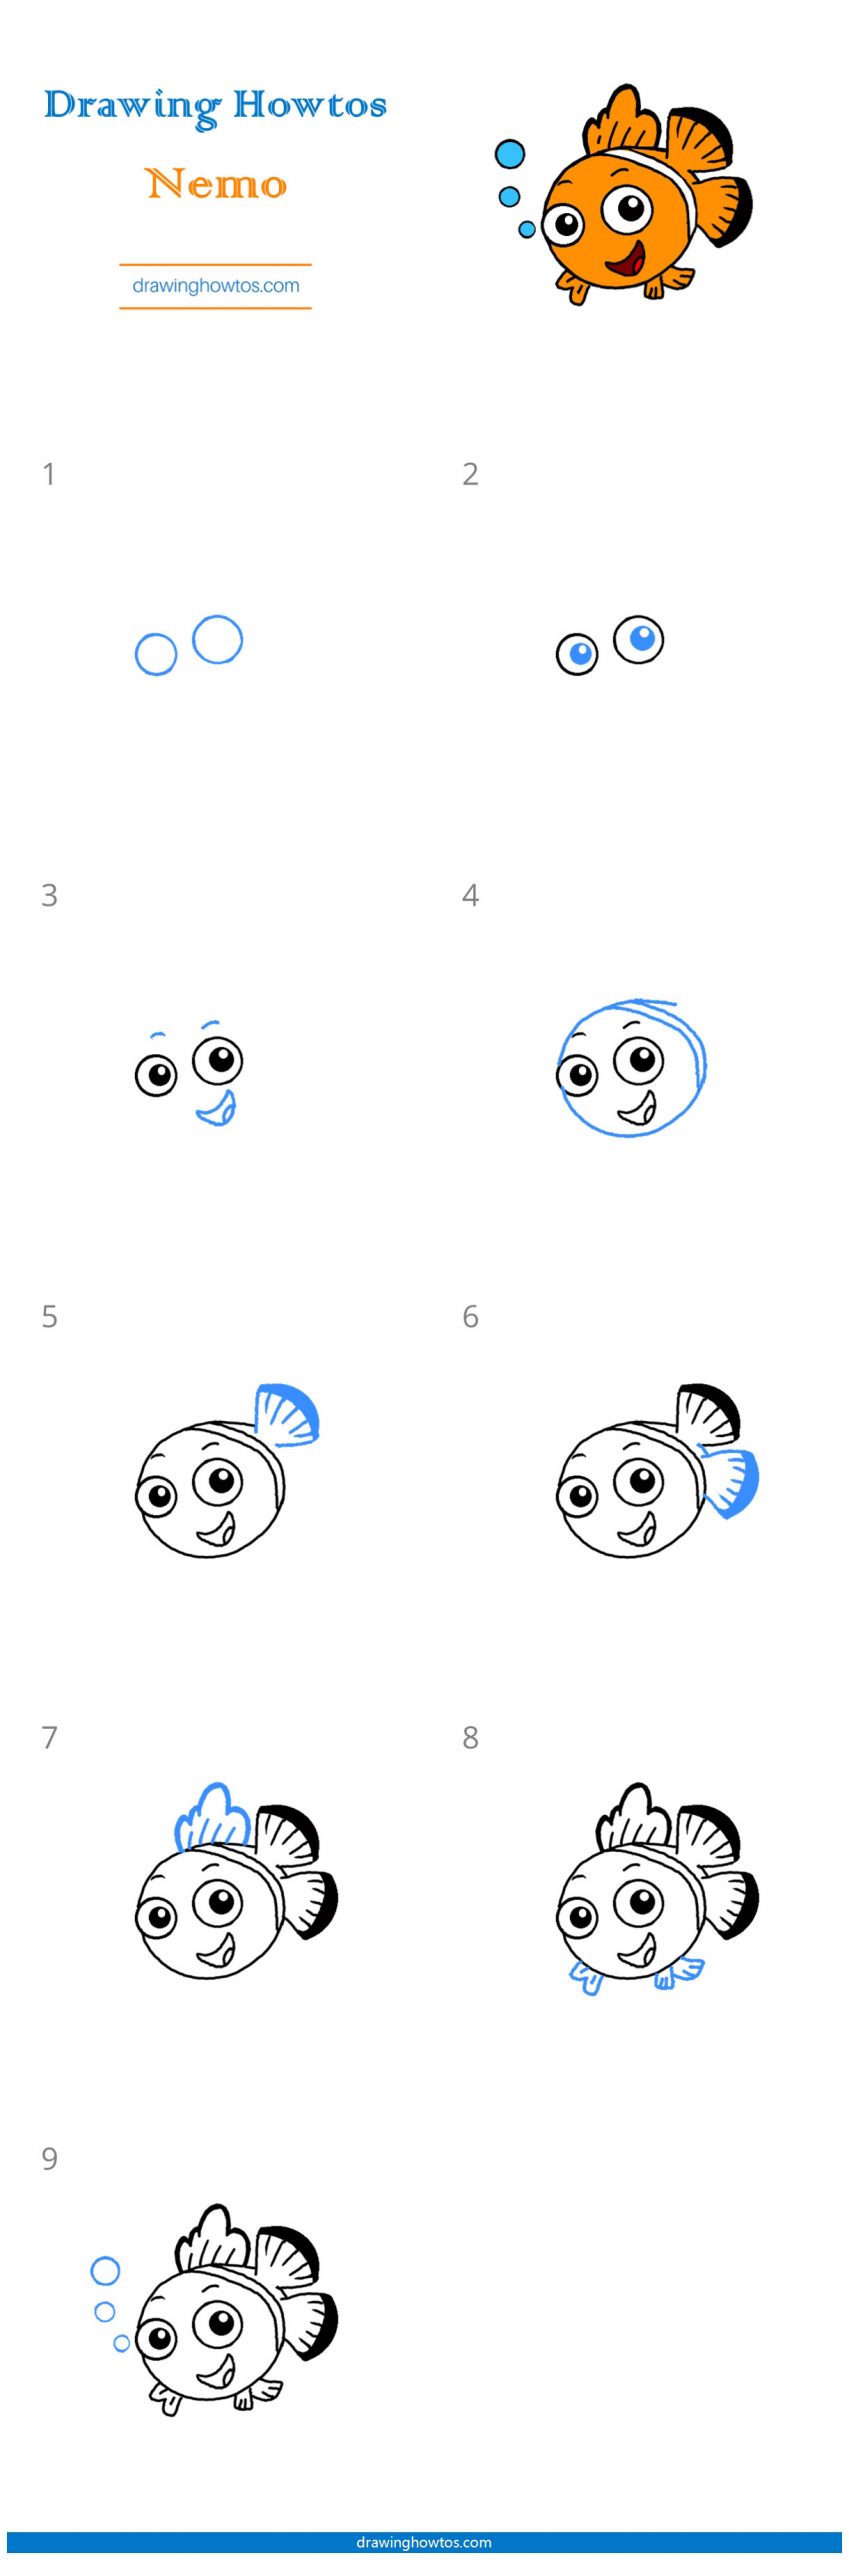 How to Draw Nemo (Finding Nemo) Step by Step